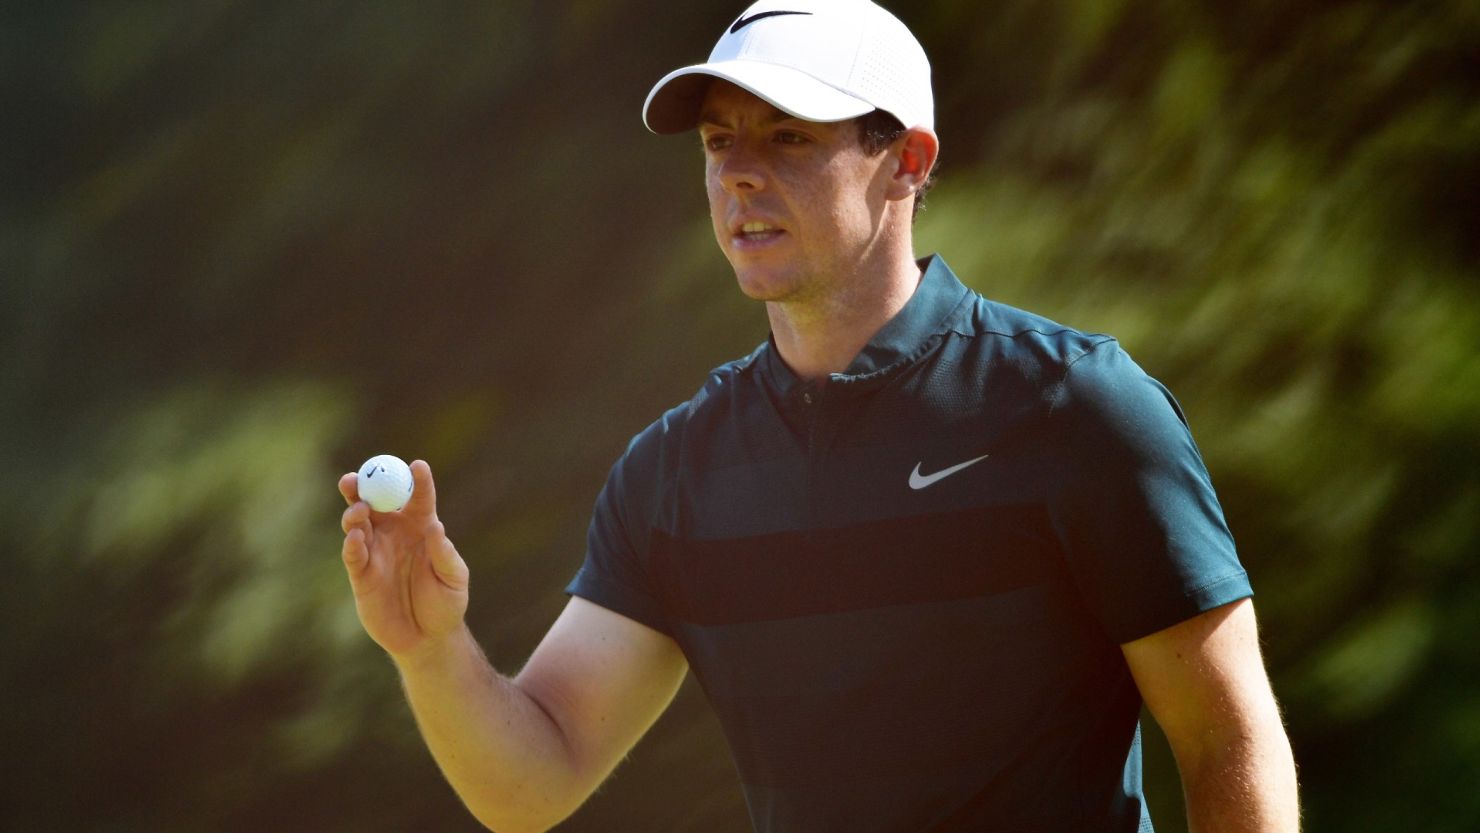 McIlroy failed to make a birdie in his opening round at the PGA Championship.